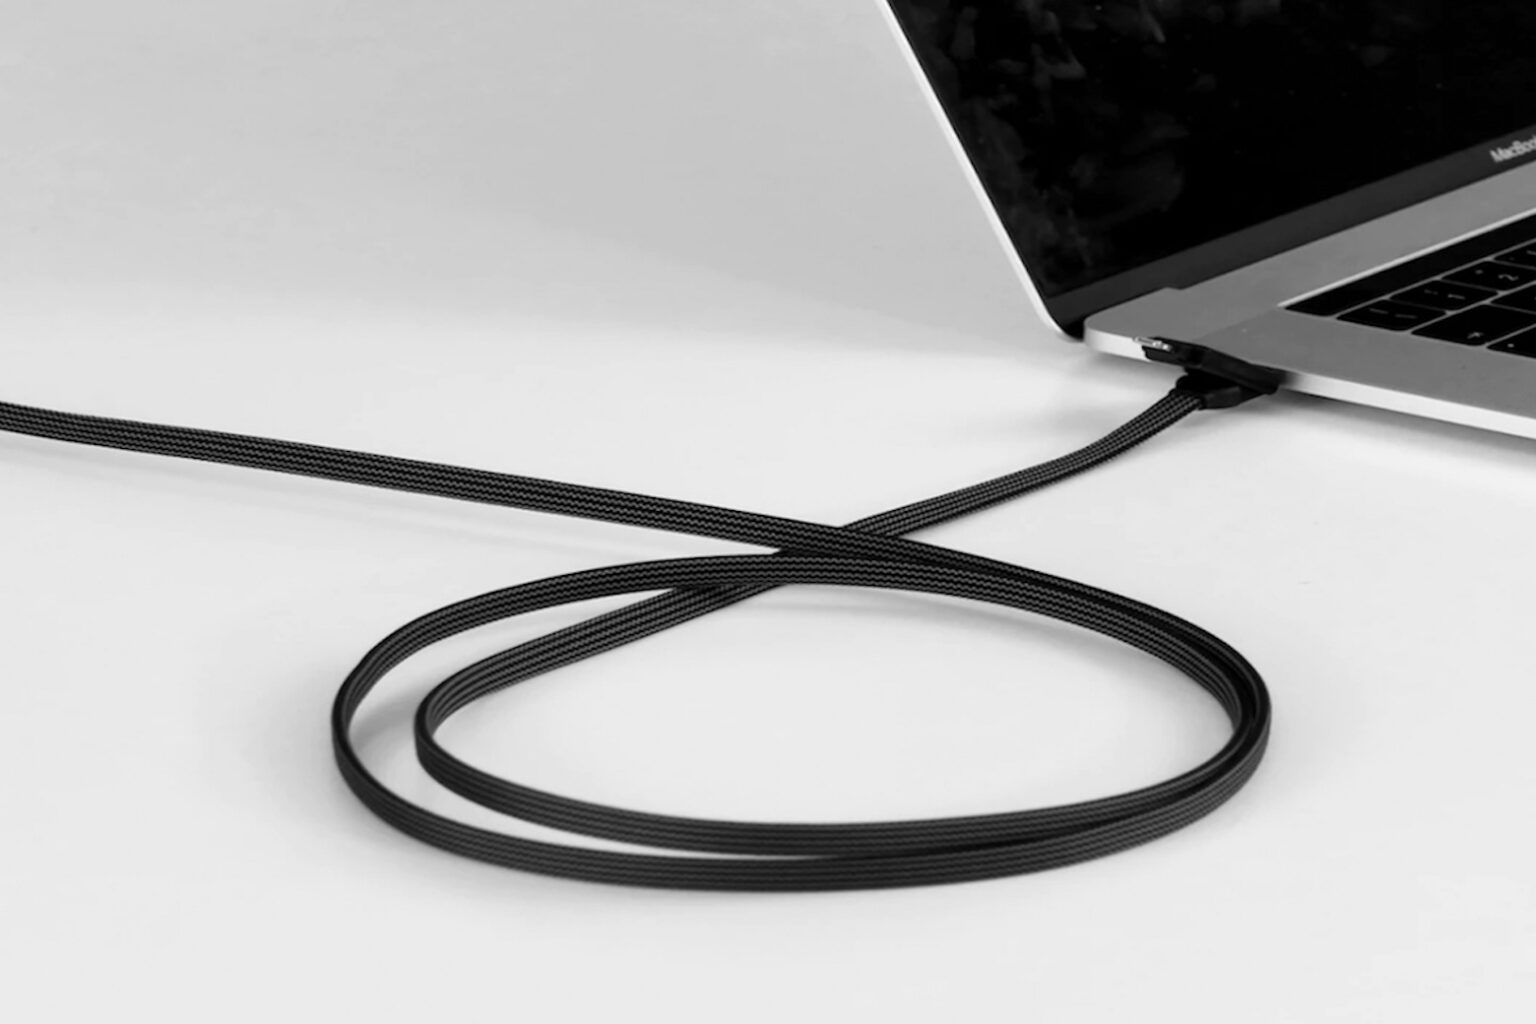 Don't miss this 6-in-1 charging cable for just $20.